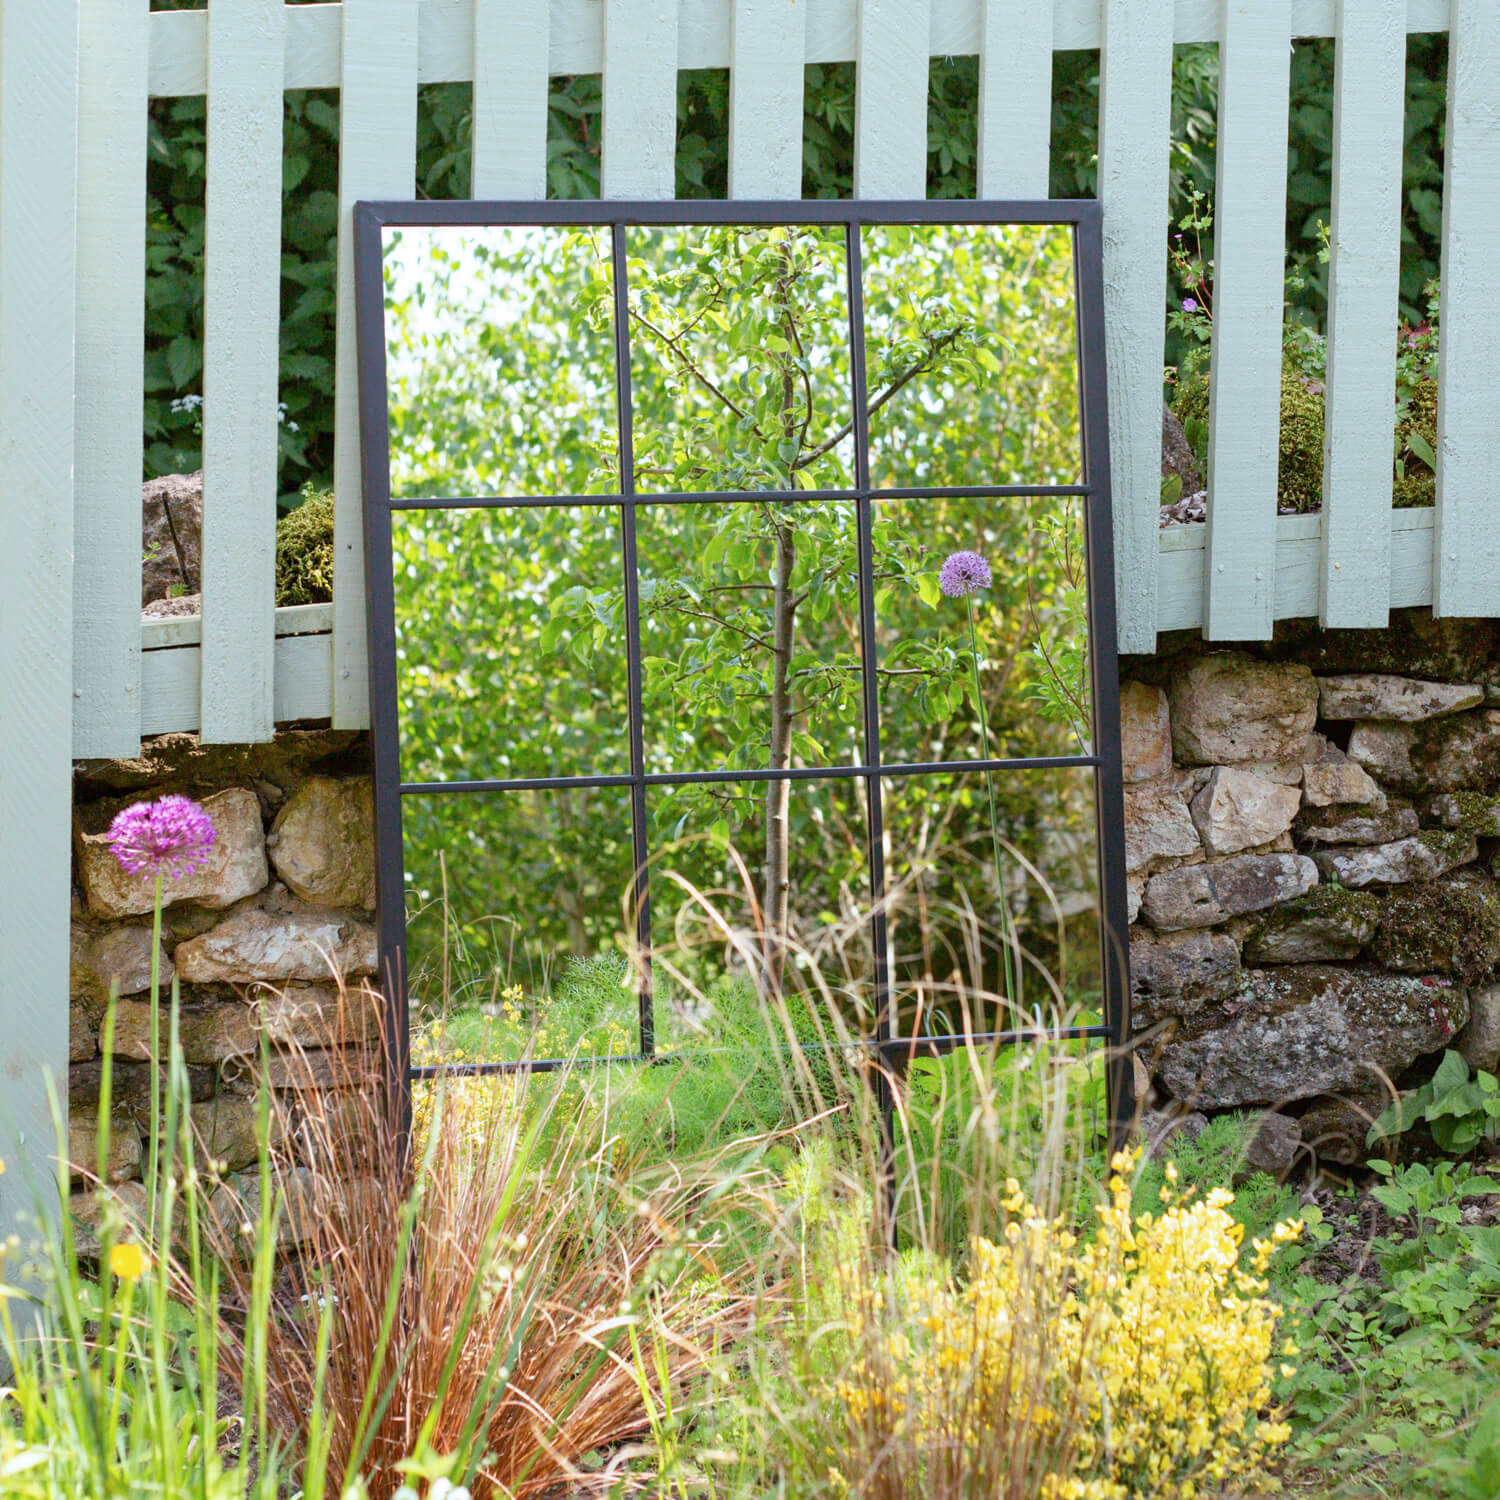 Read more about Graham and green fulbrook large window garden mirror